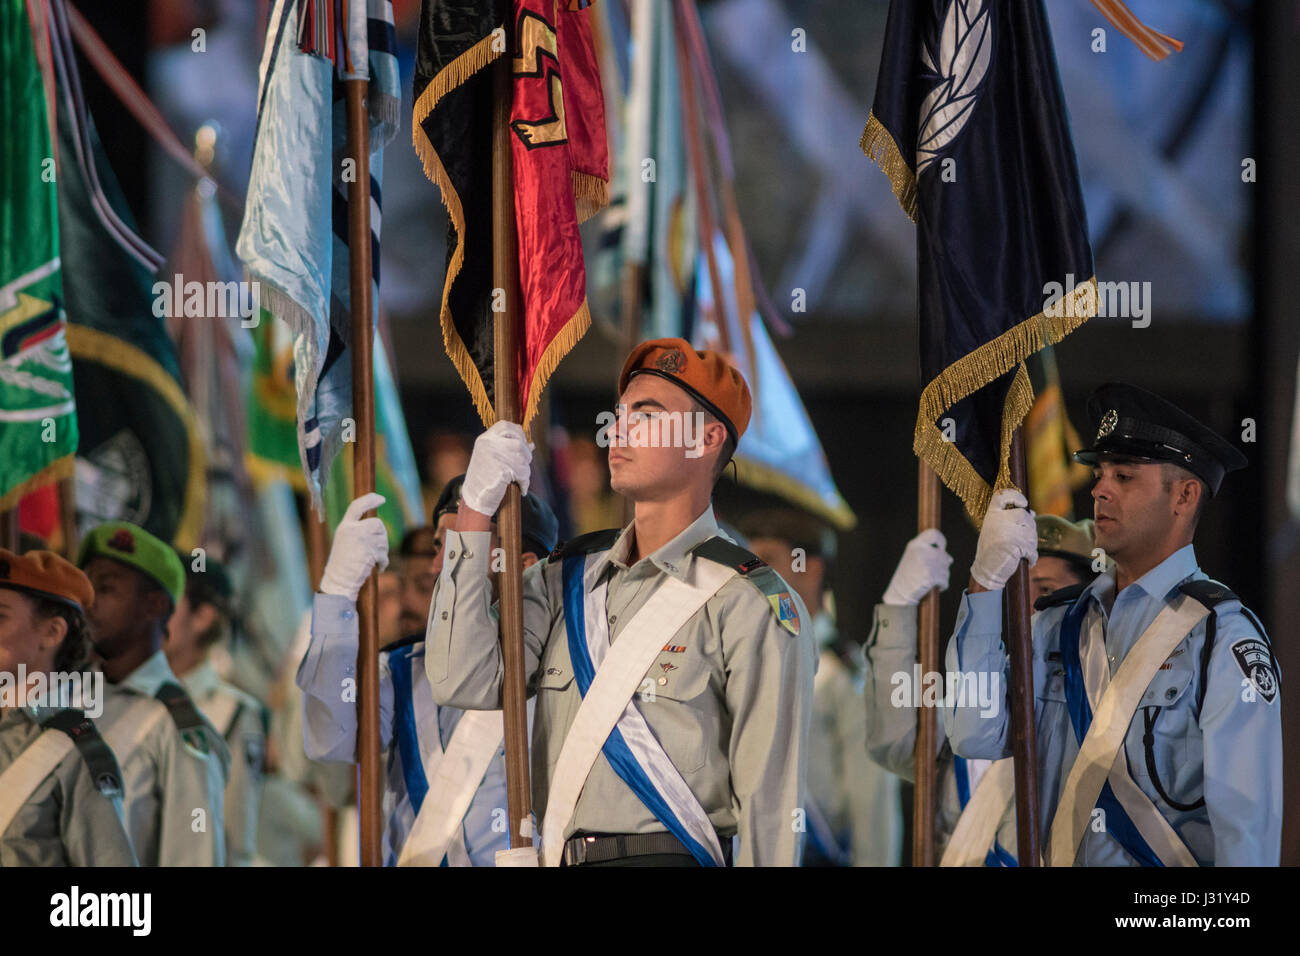 Jerusalem, Israel. 01st May, 2017. Israeli soldiers and officers perform drills during the central ceremony celebrating Israel's 69th independence day ceremony, mount Hertzl, Jerusalem. Stock Photo